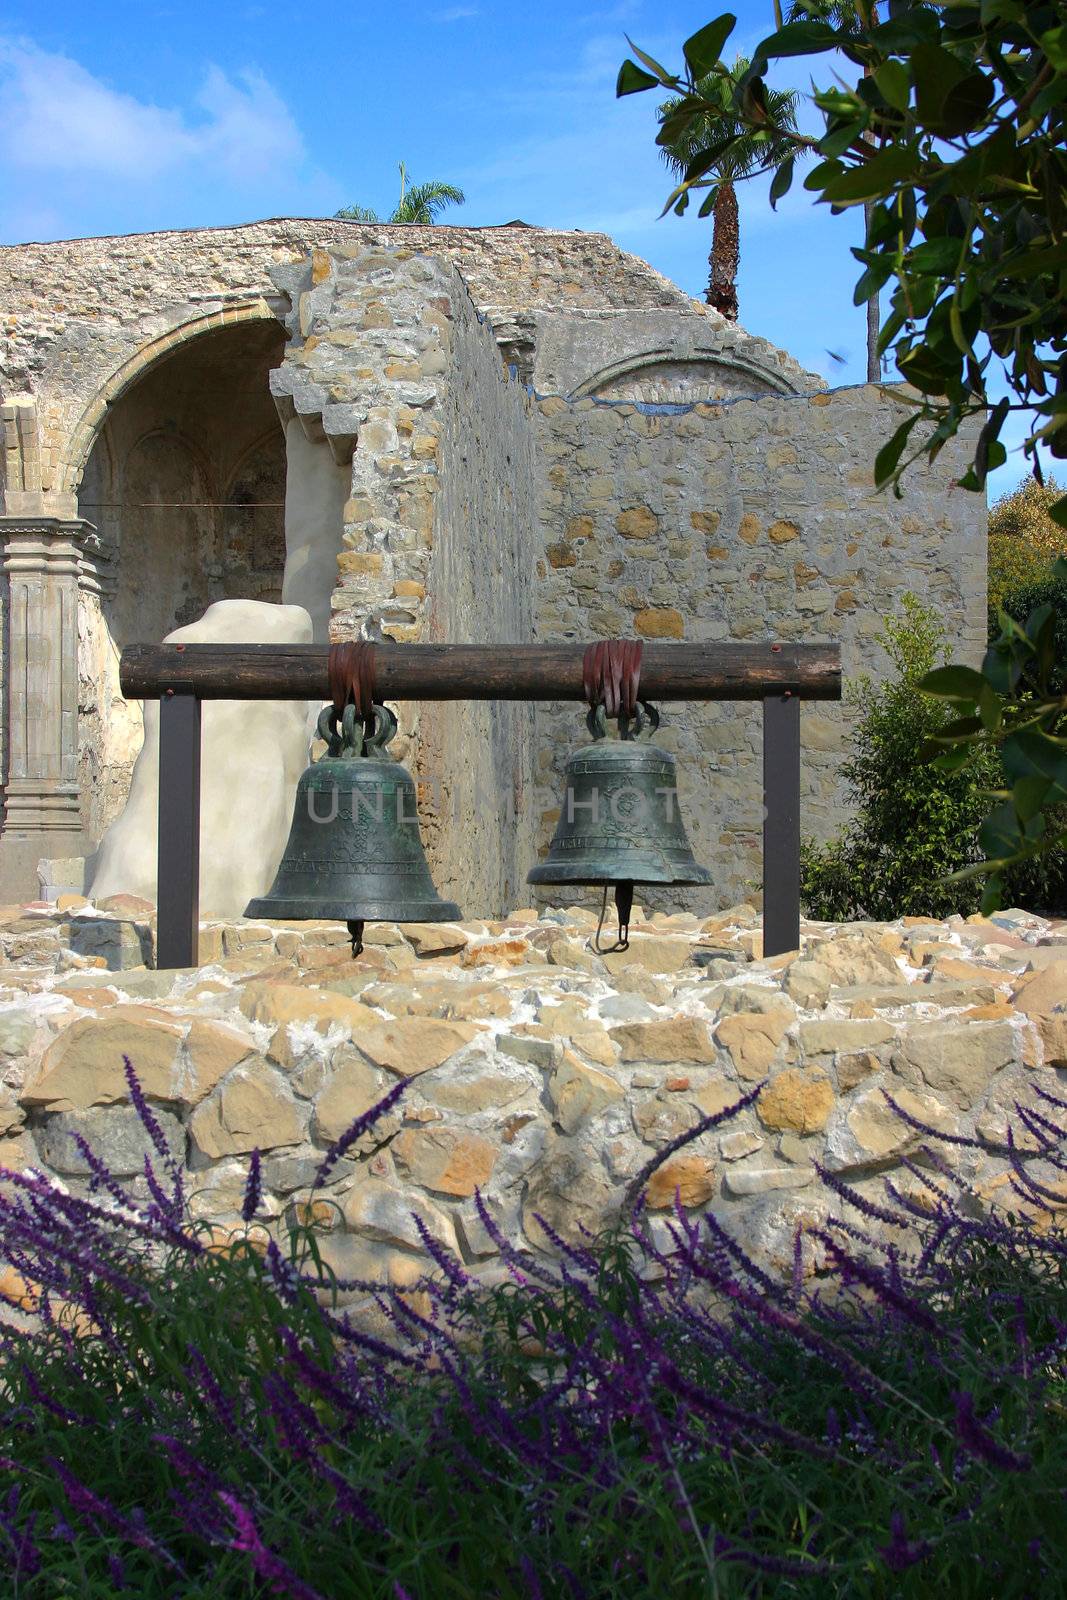 Two Bells hanging at Mission San Juan Capistrano by KevinPanizza